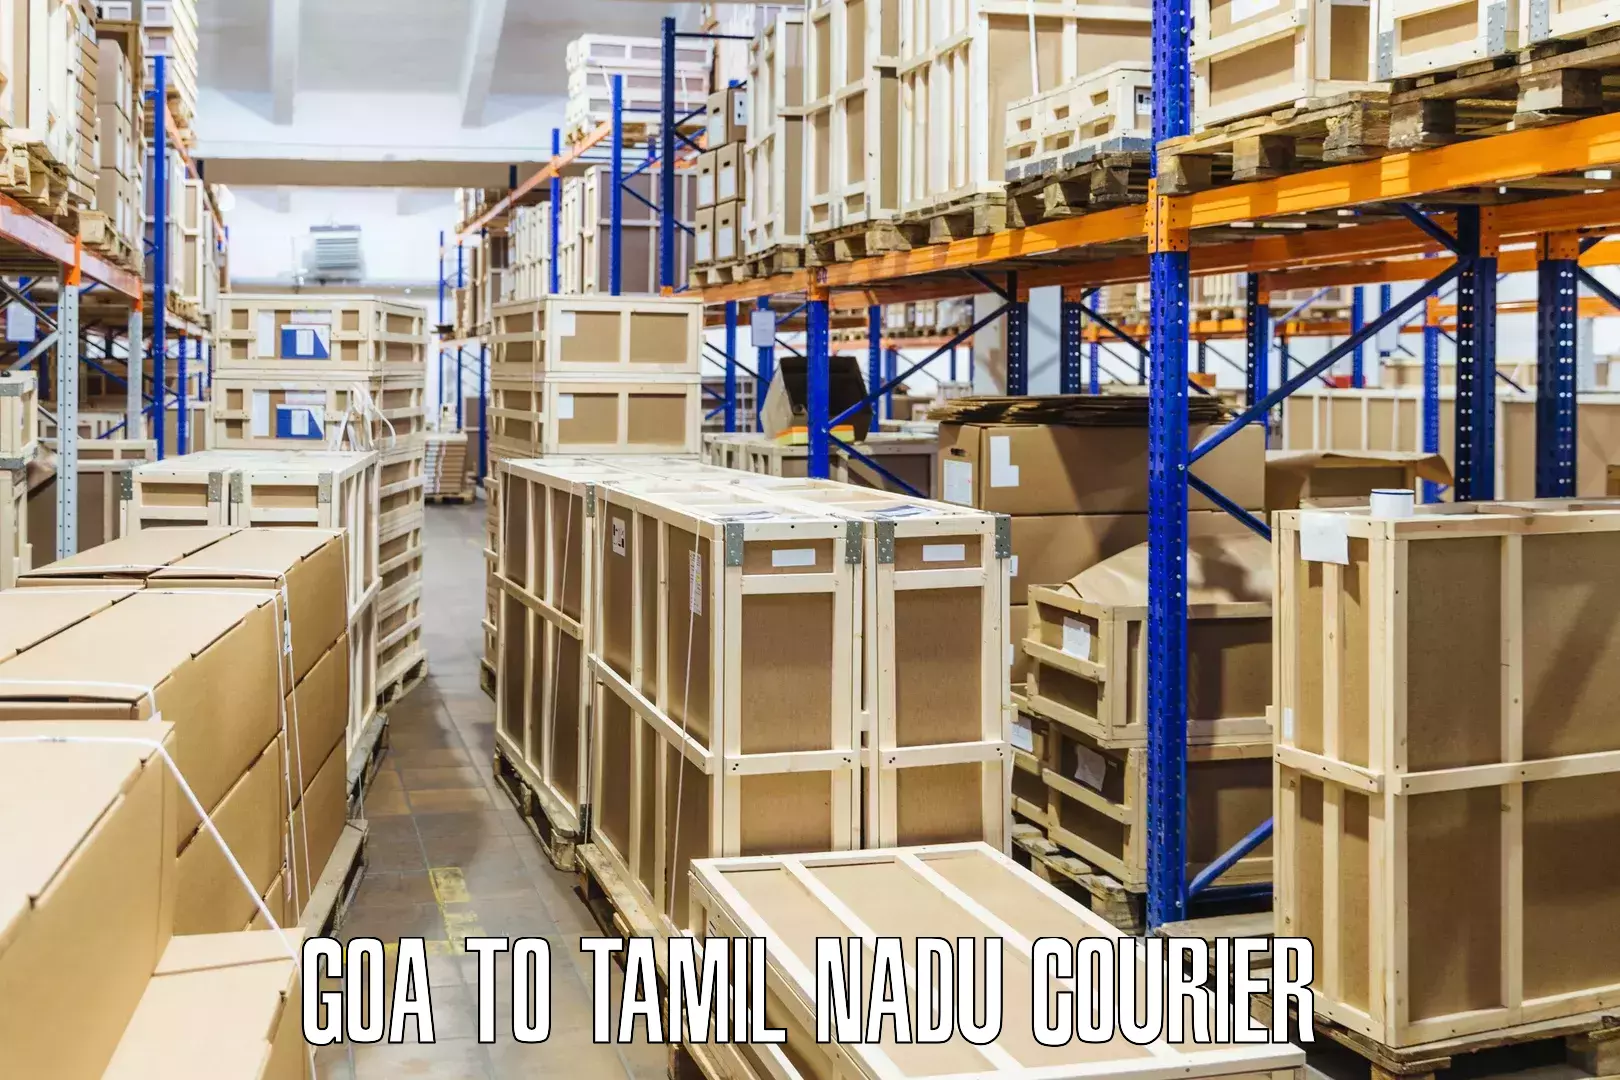 Nationwide courier service Goa to Tamil Nadu